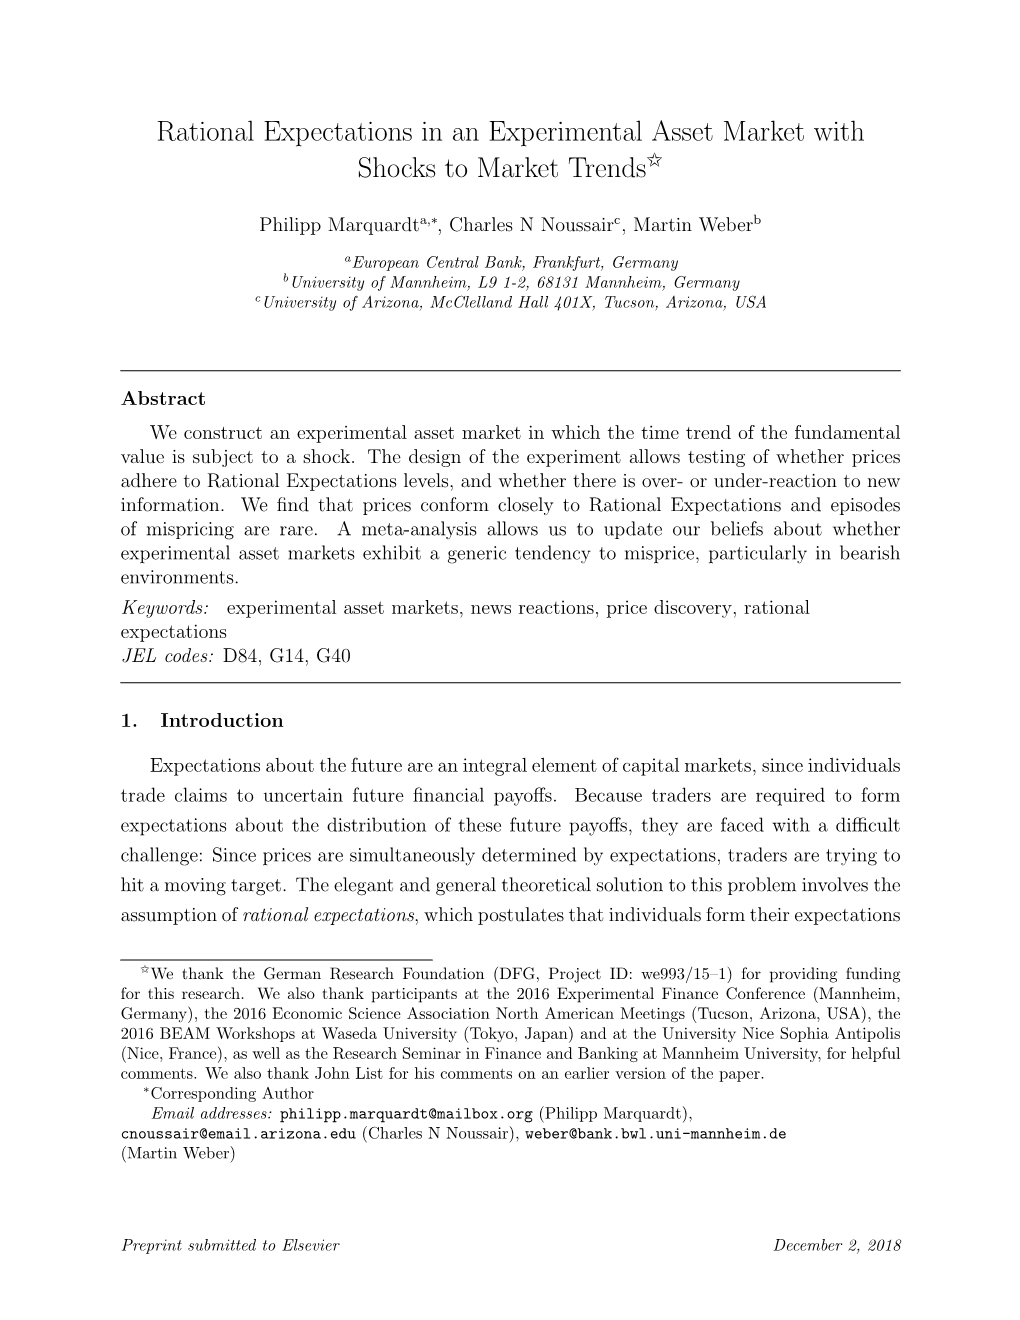 Rational Expectations in an Experimental Asset Market with Shocks to Market Trends$